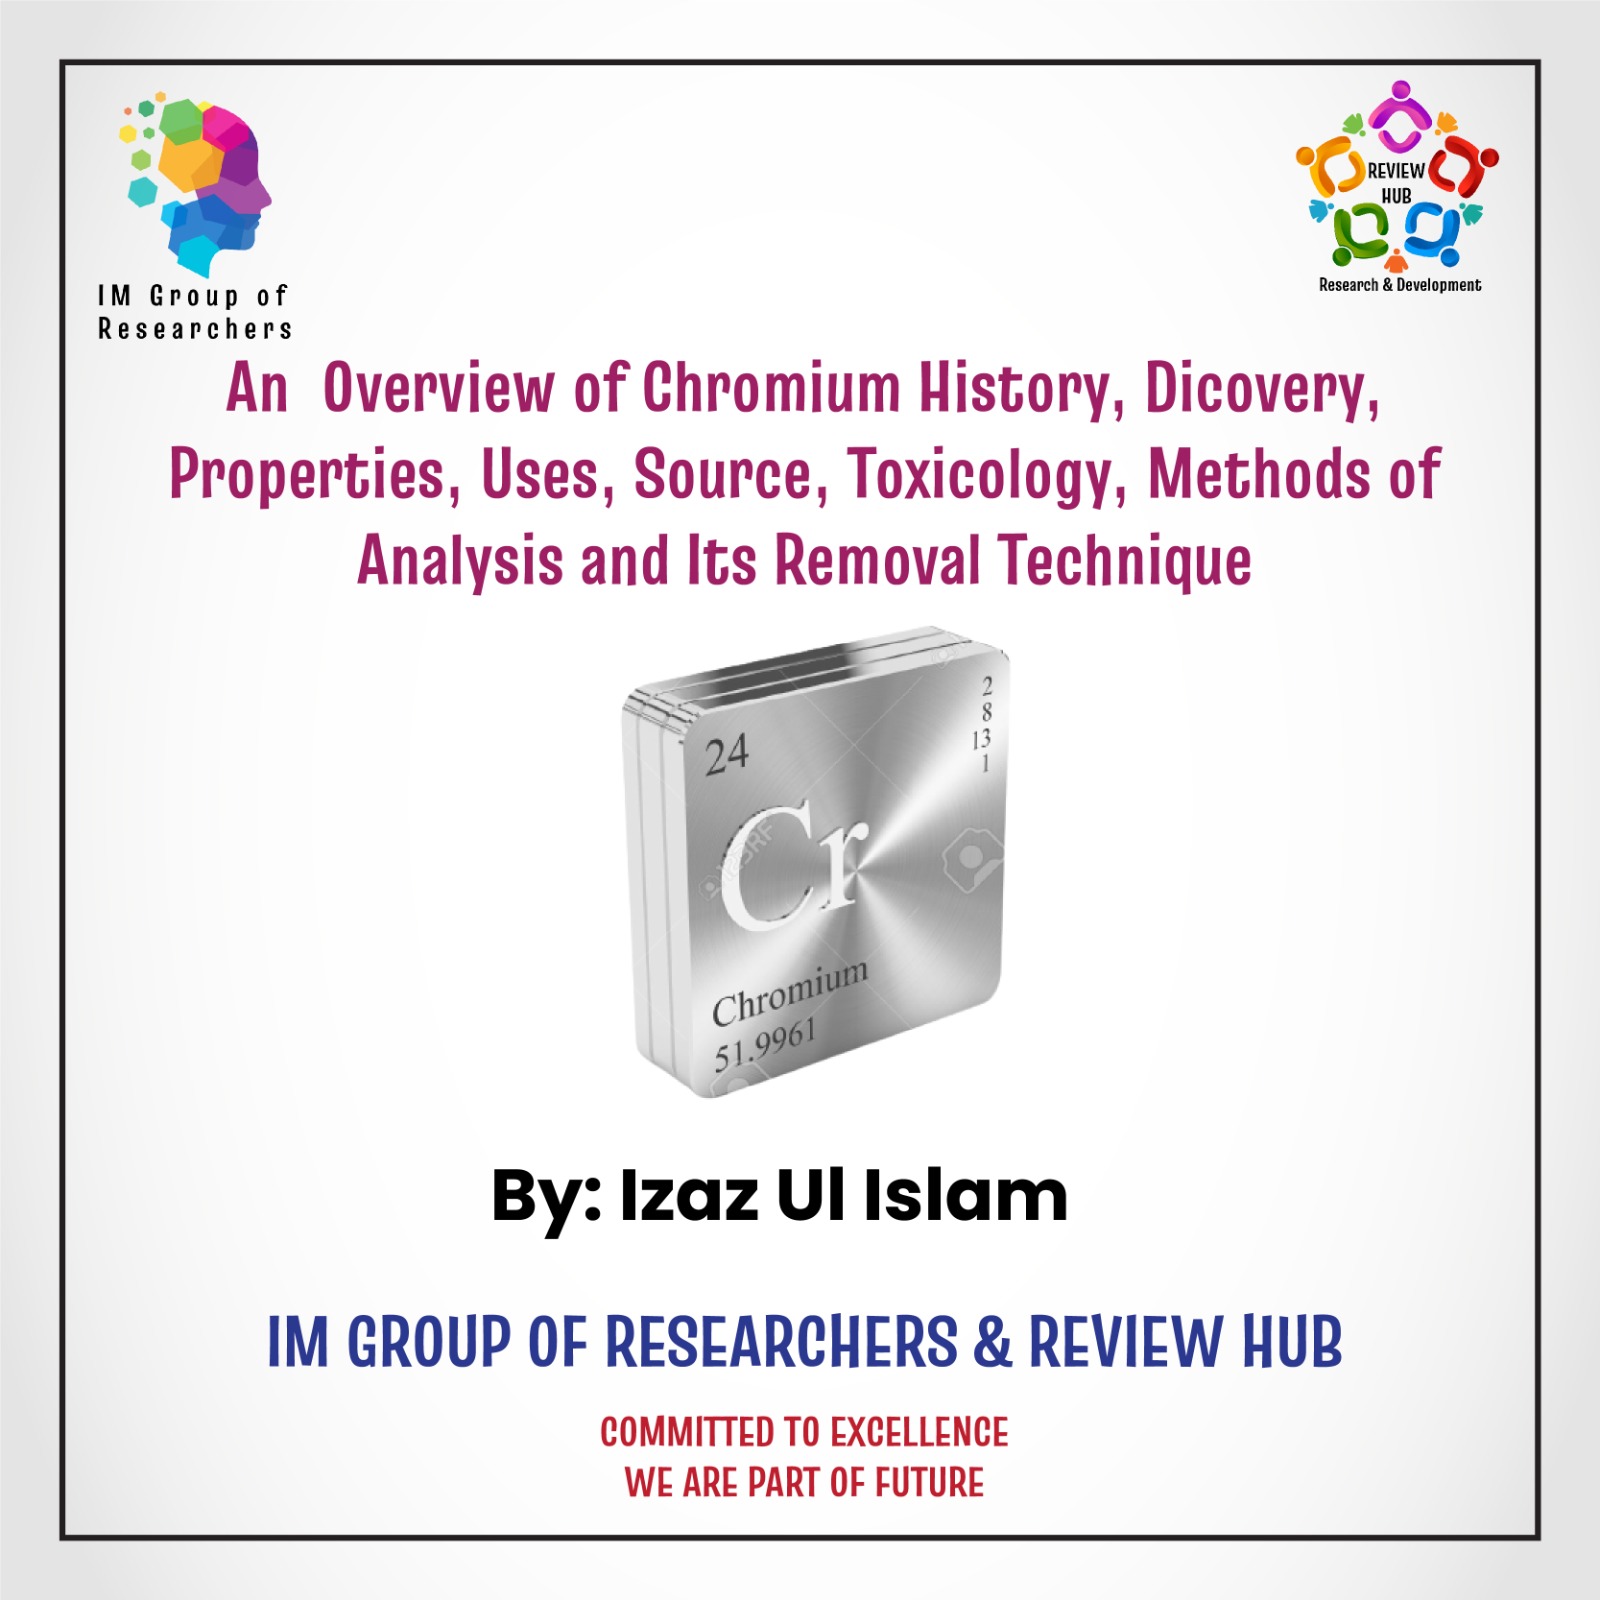 An overview of Chromium history, discovery, properties, uses, sources, toxicology, methods of analysis and its removal technique